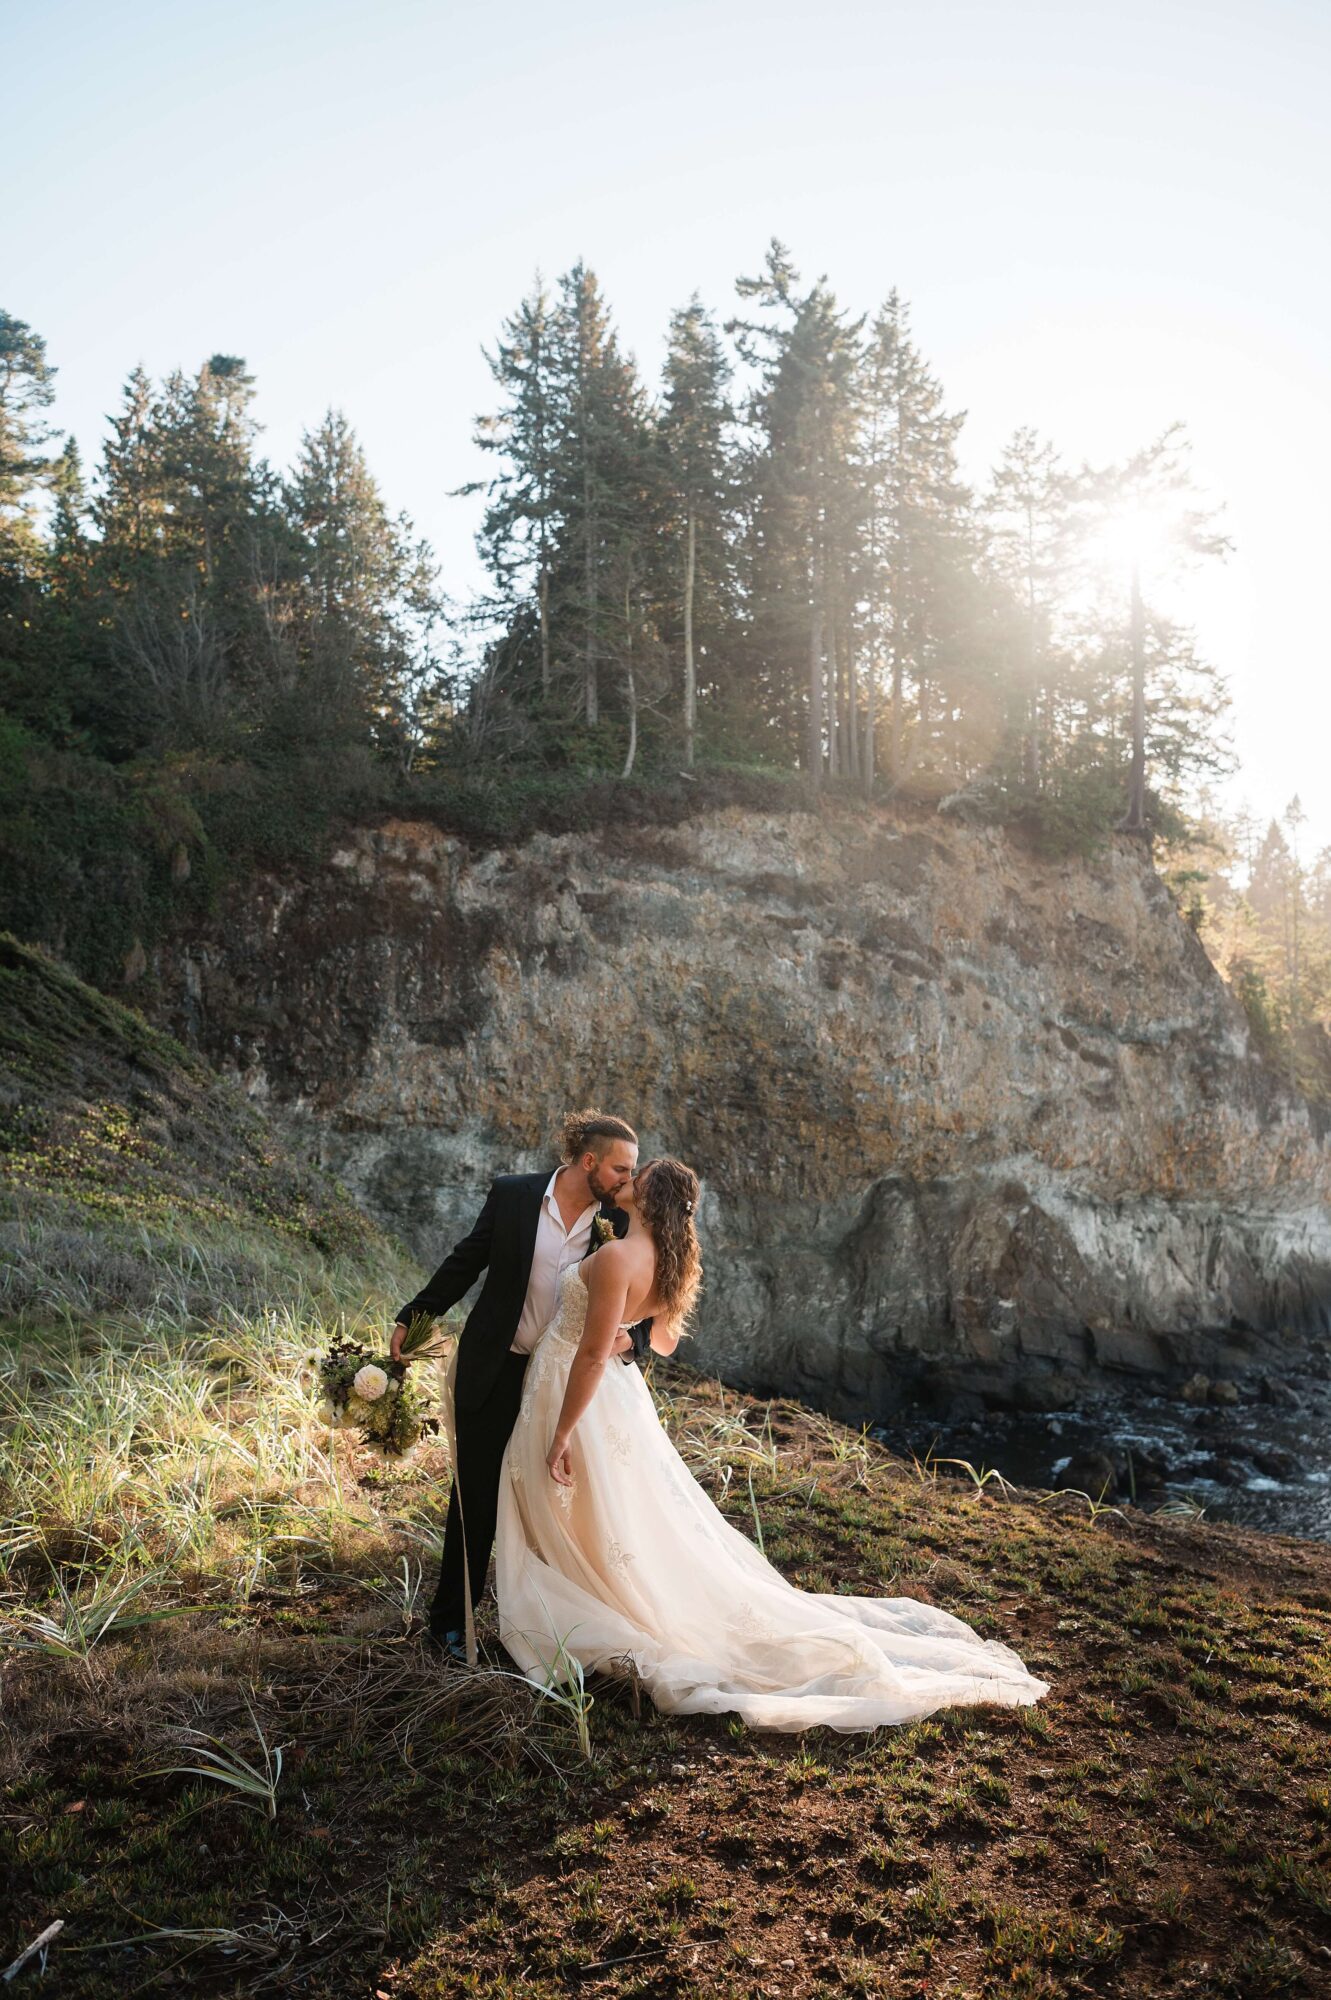 Cliffside elopement in Olympic National Park